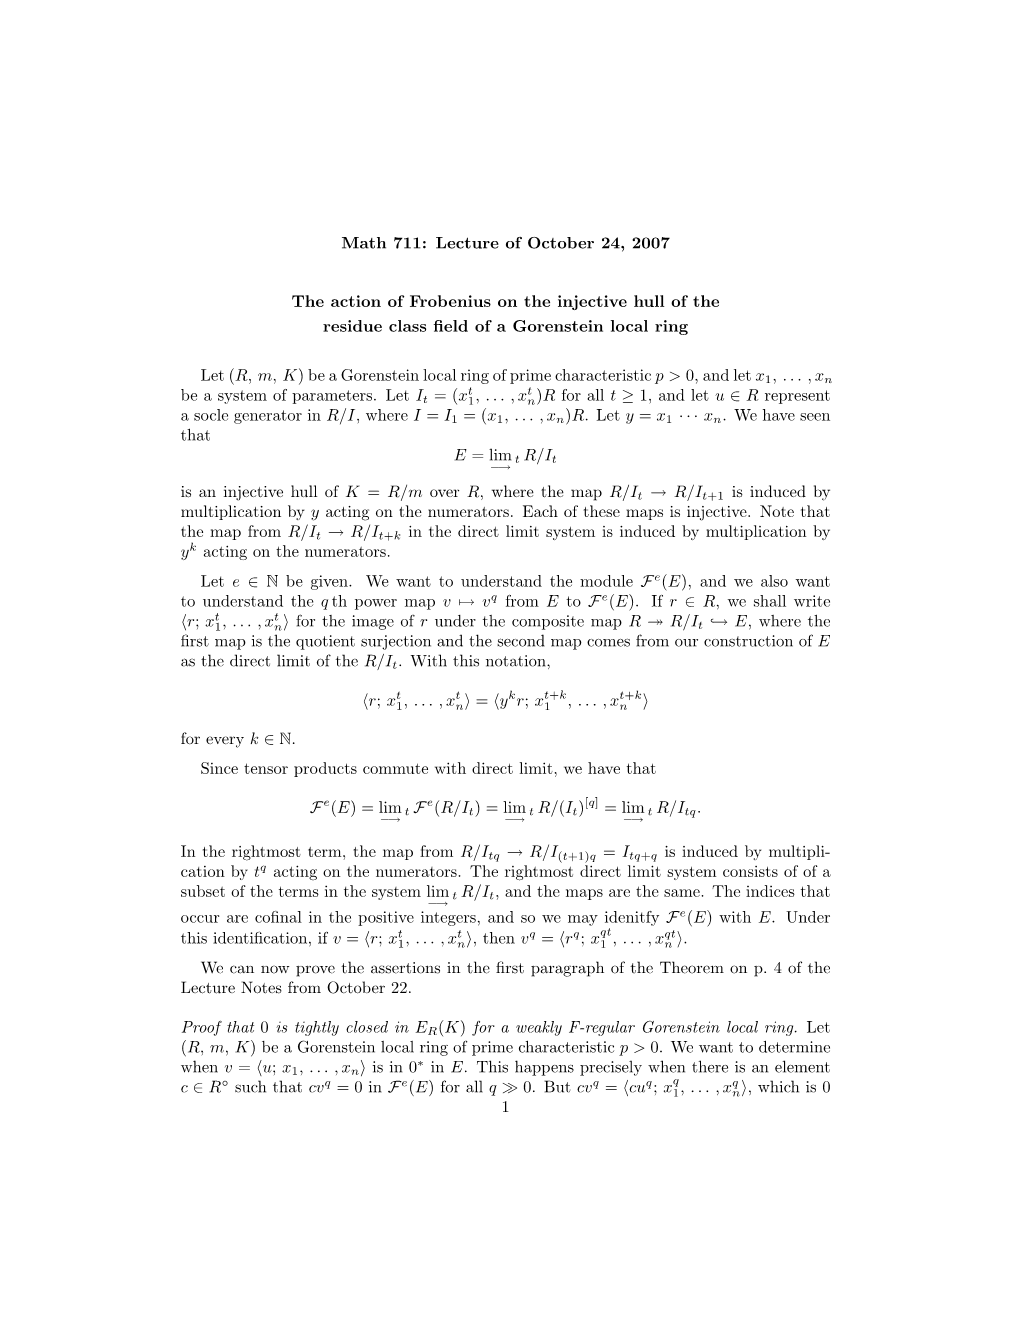 Math 711: Lecture of October 24, 2007 the Action of Frobenius on The